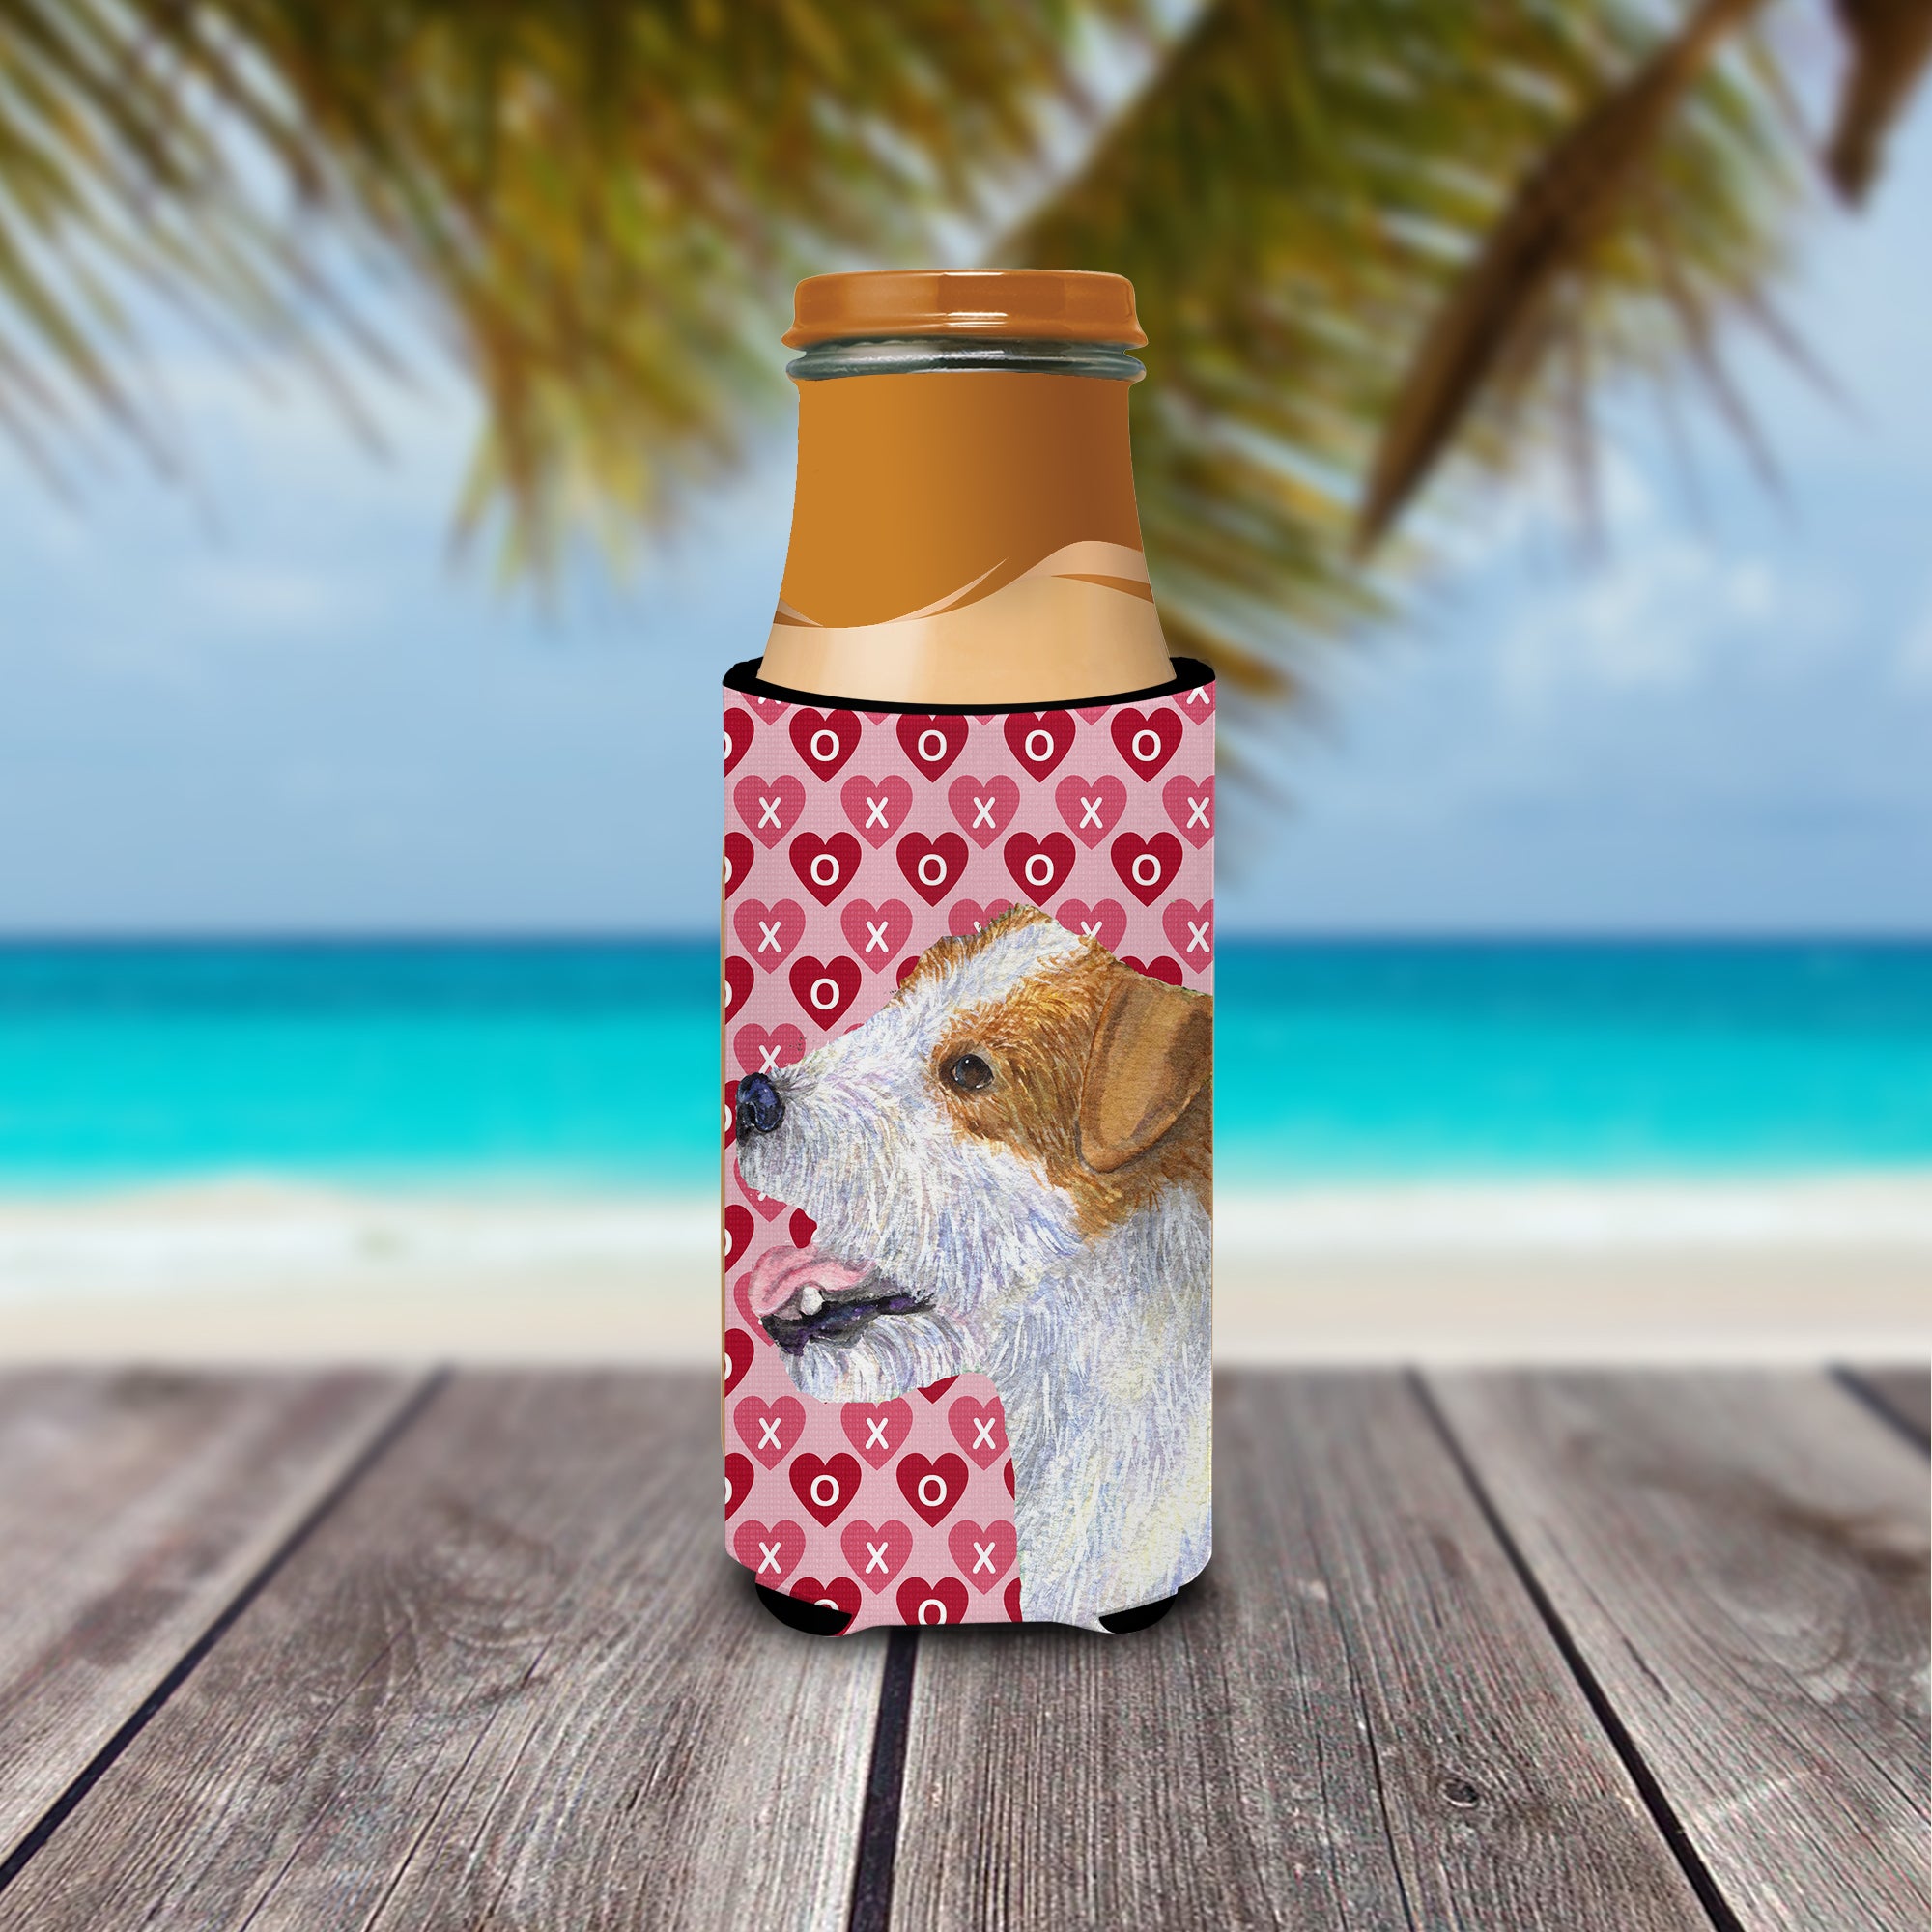 Jack Russell Terrier Hearts Love and Valentine's Day Portrait Ultra Beverage Insulators for slim cans SS4504MUK